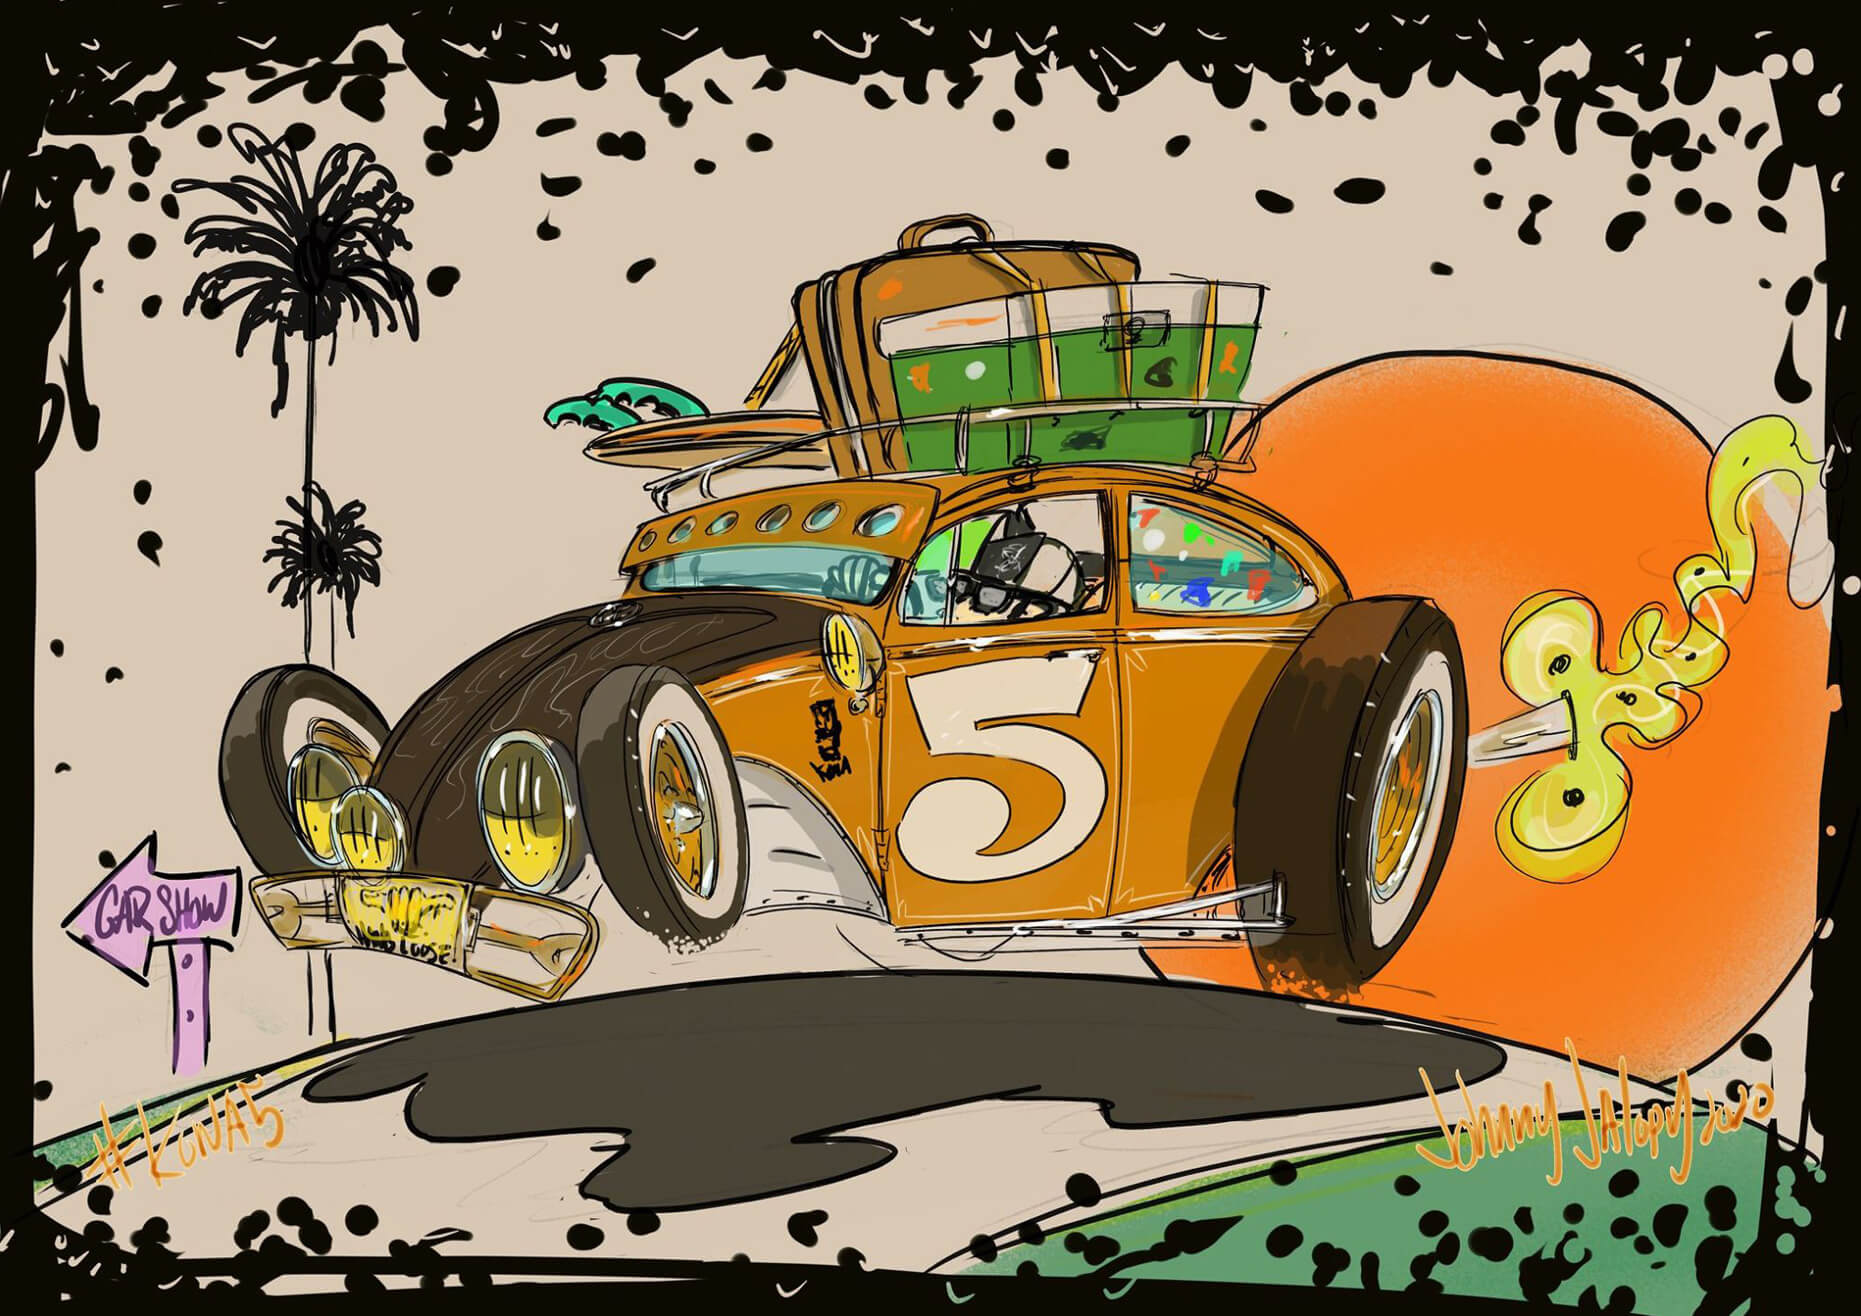 Johnny 5, Space Junkie, Funky Futura From Ventura, Flame Job, Number 5 Is Alive, Bobber Pal, On the Green, Simple Man, 36 Red Ride, 54 Chev Panal, 55 Gasser At night, Rat Mobile, Blue Tone Extracab, 1978 GMC Toon Sepa, Aloha Dave, Army, Art On Wood, Babe, Eye Guy Bagger, Bandit, Beatnik Bandit, Take A Knee, Black Brown 57 Chevy, Black Singal Cab Surf, Bo Huff Tribute, Bo Huff T, Board Tracker, Bobber Toon, Bubble Concepts, Still Plays With Bubbles, Orange Two tone bug, Baby Blue Bug, Bug Red, The Hold up Buick, Buick City, Caddy, 70 Camaro, CCab, COE Kid Jalopy Truck, Chopper B/W, Chop Shop Van, Chopped Custom pink, For Certain T, Flying Eye Chopper, Chopper Dude, Chopped VW Gray, City Run, C10 Gray, Color Motion, The VW Hang Out, Concept Bubble top, Custom cruiser Bubble Top, Corvair Surfs Up, Corvanning, Minty Fresh Buggy, Stung, Lets GO!, Da Weeds, Inline is fine!, Crazy Rails, lucky 7, Buggy Fun, Red Wings, Evil Drag New Color Crazy, Eye Guy bucket, his EYE is on YOU!, Made In, Frosty VW, Five Window Surf, Showing Scars Surf Rod, Flying A, Later!, Up high, Frankie in da Bucket, Frankie Hard, Franky Big T, Frantic Final Driver, Full Color Print, Garage 1, Garage A, Gas Bubble, Gas Up, Gold Nugget, Gray Grill, Green City Speeder, Green Light, Half And Half, Hang Lose, Harly Bobber, Hauling Bucket, Home Brew TShort, HRWC, Insecurity, Jalopy Wiskey Truck, Jalopy Hooker, Jimmy Fishbone, JJ Monster, Kid Jalopy, Kid Jalopy Farlane, Kid Jalopy Fleetline, Kid Jalopy Rockhell Sidekick, Patina Blue Bug, Rusty Patina Volksrod, Gray A, White Impala, Let's roll, Black Beauty, Lost And Found, Lowtide Guy, Mahalo Hut, Mahuling, Model A Gray, Mustang Bill, Purple Elco, Ghia, Red Rum, Surf Bucket, Volksrods Rock, Who's Next, Old Skate Dude, Old Time, On Fire!, Orange T, Orange Bobber Kool, PBR, Polo Loco, Rail Job Fire, Rat Bug Flying, Primer Volksrod, Traditional Rat, Rattastic, Ruby Dub, Red Convertible, Red Rat Bike, Teal Time, Ripping It Up, Rixshaw, Rock Star, The Rod punk, Roth hauler, Rowe, Royal Purple, Sepa Zepher, Side Car, Skate Dude Black, Skate Dude Surf Truck, Skeleton Rider, Skull Rider, Red Sled, Slunglow, das Volksrod, Space Junkie Toon, Space Junkie II Concept, Space Rod, Spike, Notchback Toon, Stripper, Surf Deluxe, Surf Brother, Tiki Bus, Surf Bum, Pearl Gold, Zombie Squad, Surf Fink, Red Ford, Teal Surf Ford, Surf Freak, Surf Internatinal, Surf Is Up, Surf 'N Dude, Surf Rods, Blue Pencil T, Surf Wax, Yellow T-Bucket, The Belly, The Driver, The Drive, The Race, The Rose, The Tall A, Thing, Tiki Dreams, The Legend, Barn Finds, Trike, Lights On, The Sepa T, VW Draggster, Vintage Speed Shop, Volksrod Tiki, VW 70 Rag Top Green, Rusty Bus, The Sand Bus, Mint VW Ghia, Rags On Bags, Patina Bus, Spot On, Chopper Transport, Rolling Down 66, Loaded Up, WASP, Want You, Hollywood Knights, Coors Ride, Zombie Rider, Crap it's Thursday